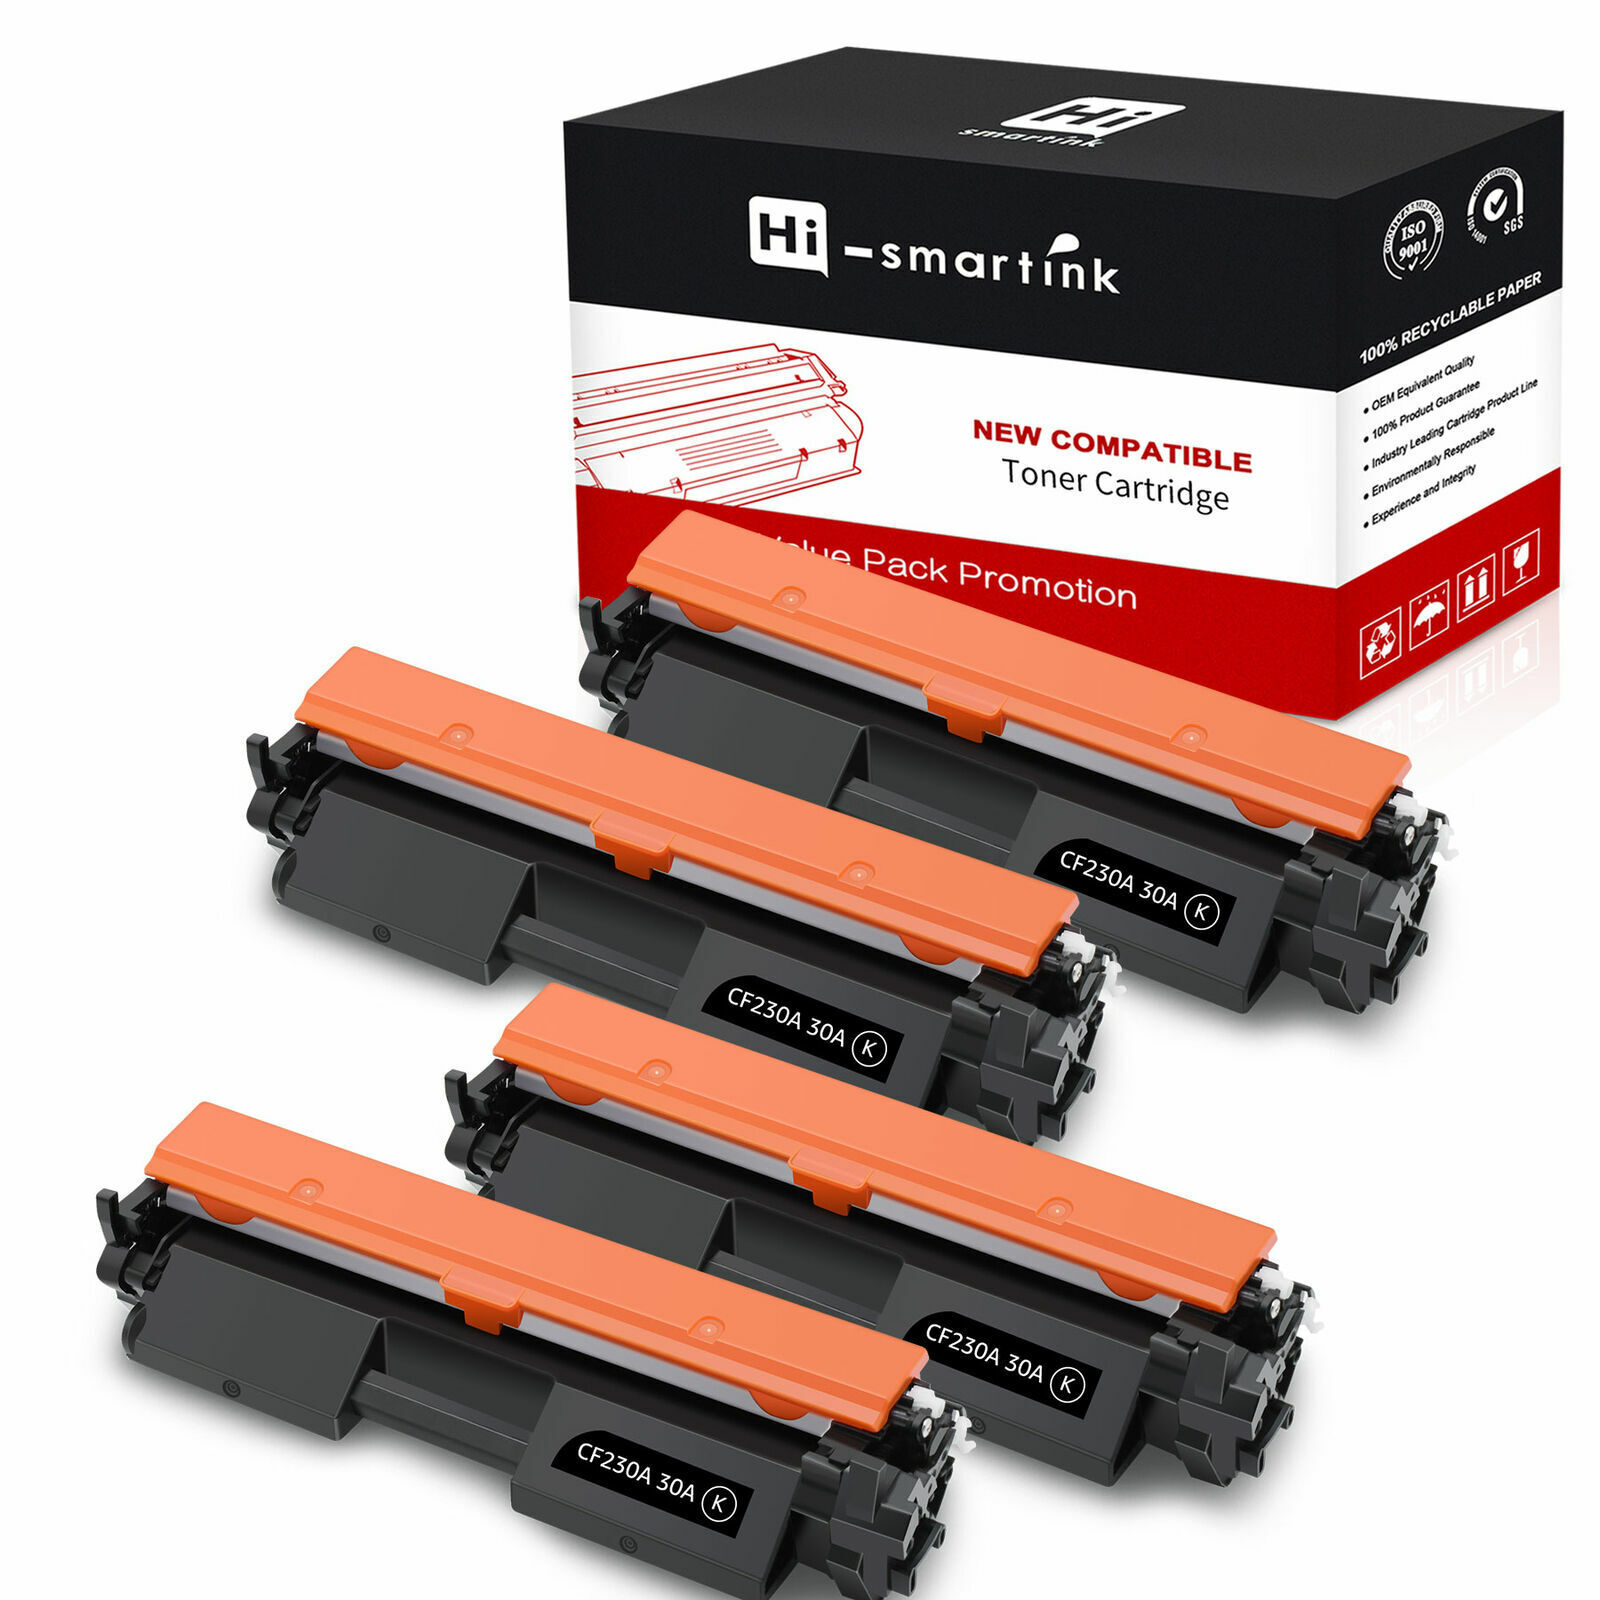 4x CF230A 30A Toner Replacement for HP LaserJet Pro MFP M227fdw M227sdn W/Chip